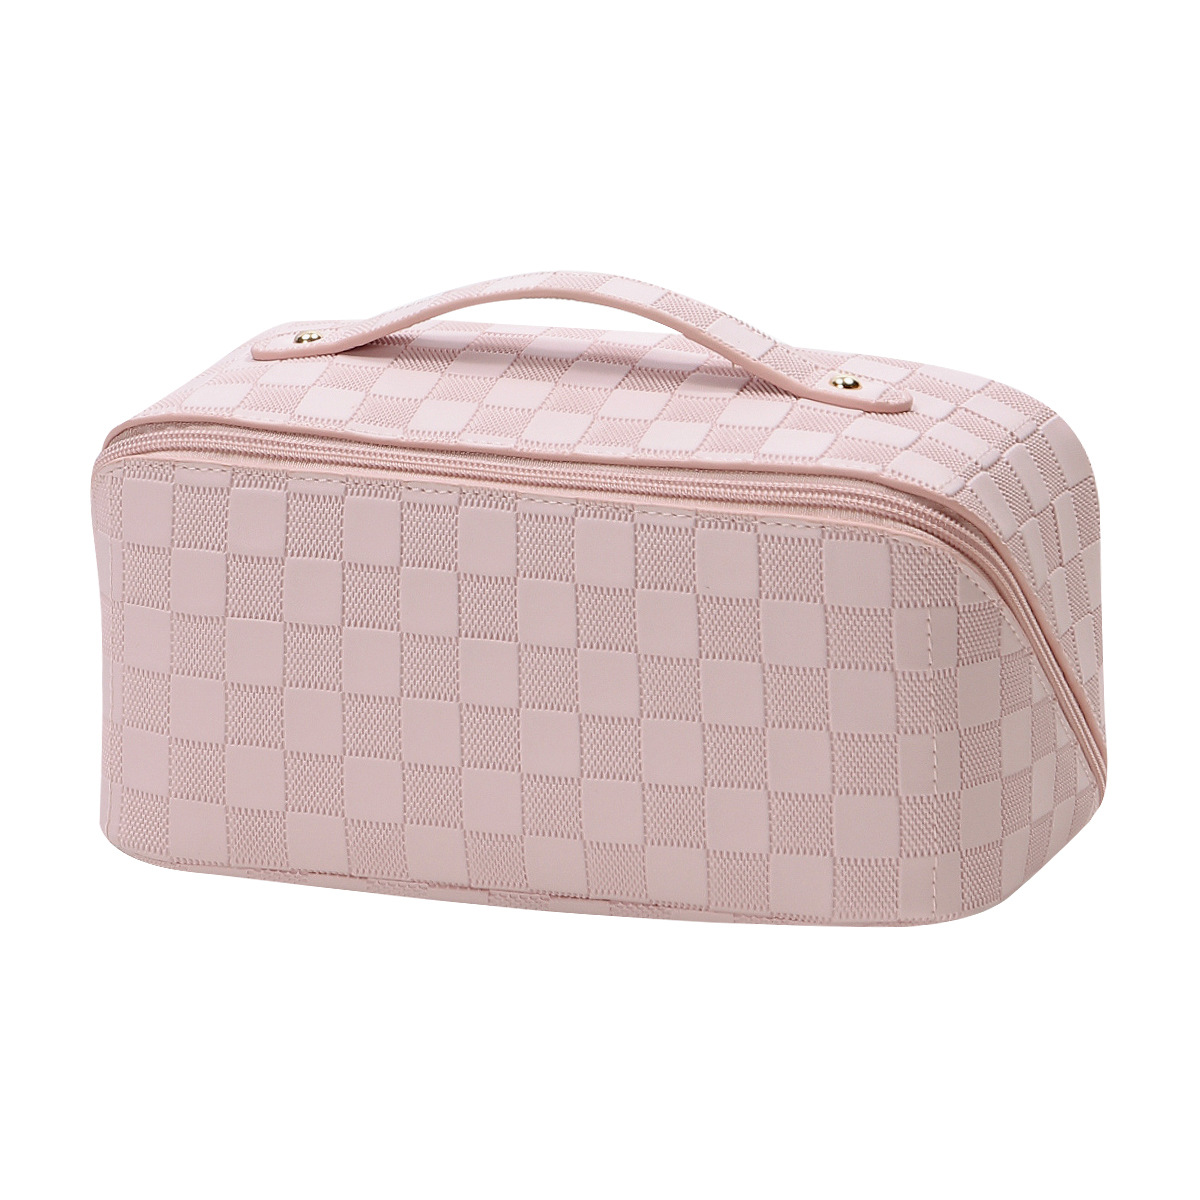 Cessfle Large Capacity Travel Cosmetic Bag Plaid Checkered Makeup Bag Portable Leather Waterproof Skincare Bag with Handle and Divider for Women